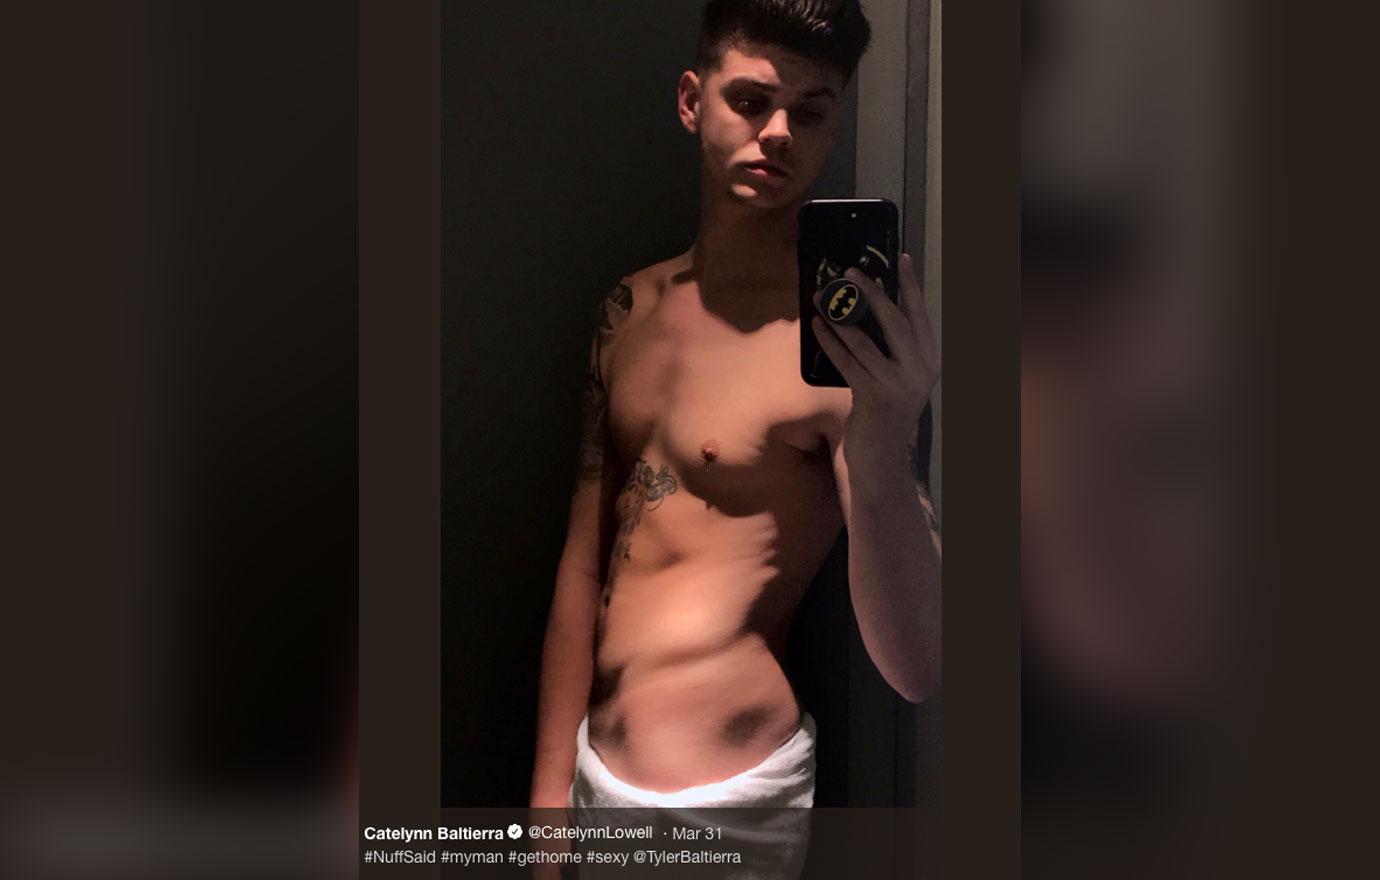 Tyler Baltierras Naked Photo Is Released By His Wife Catelynn Lowell 2361